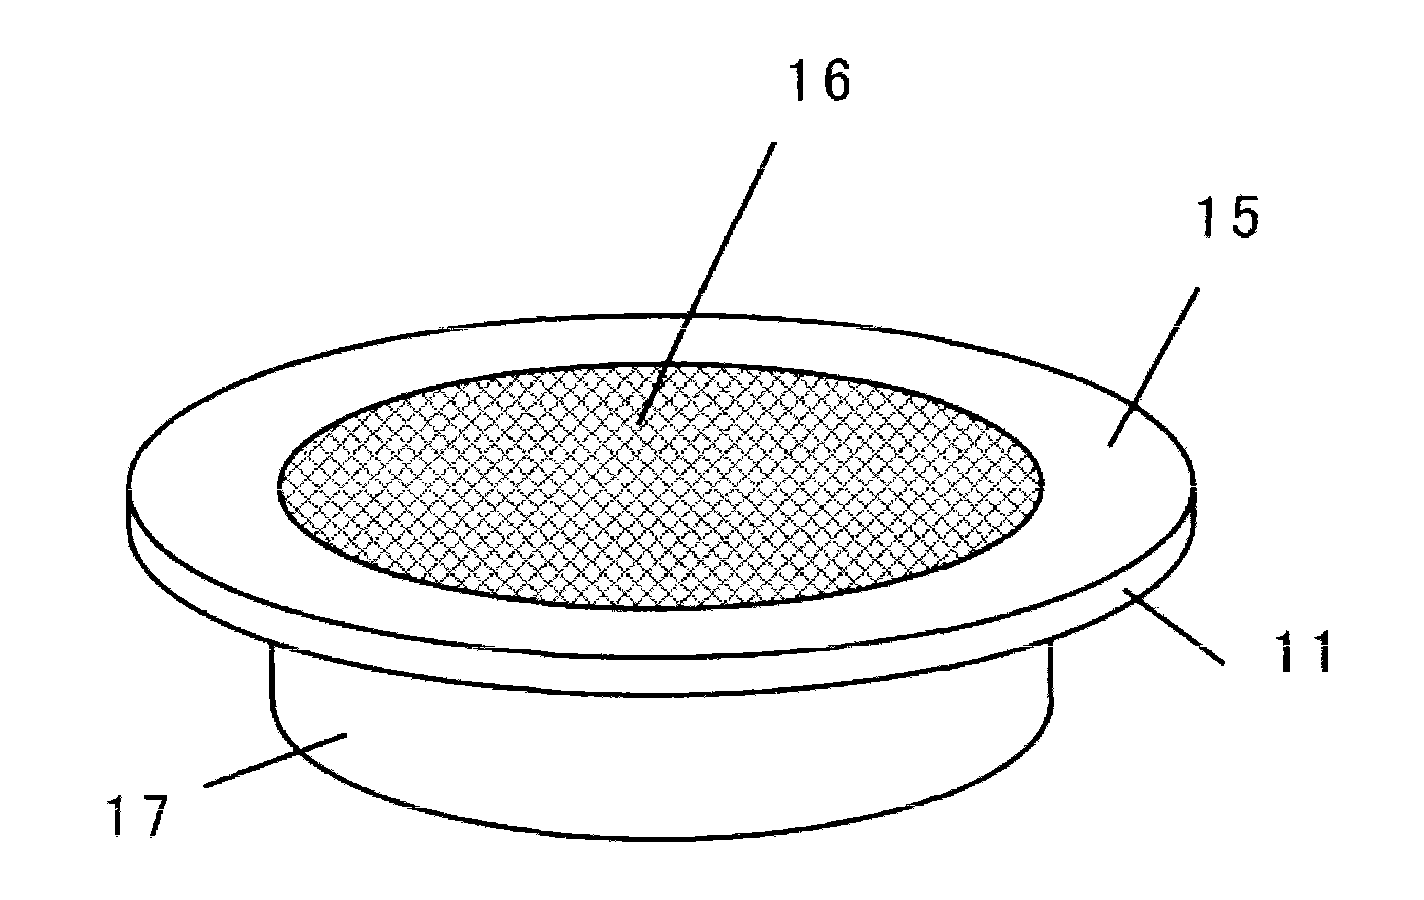 Self-heating pressing moxibustion and processing method